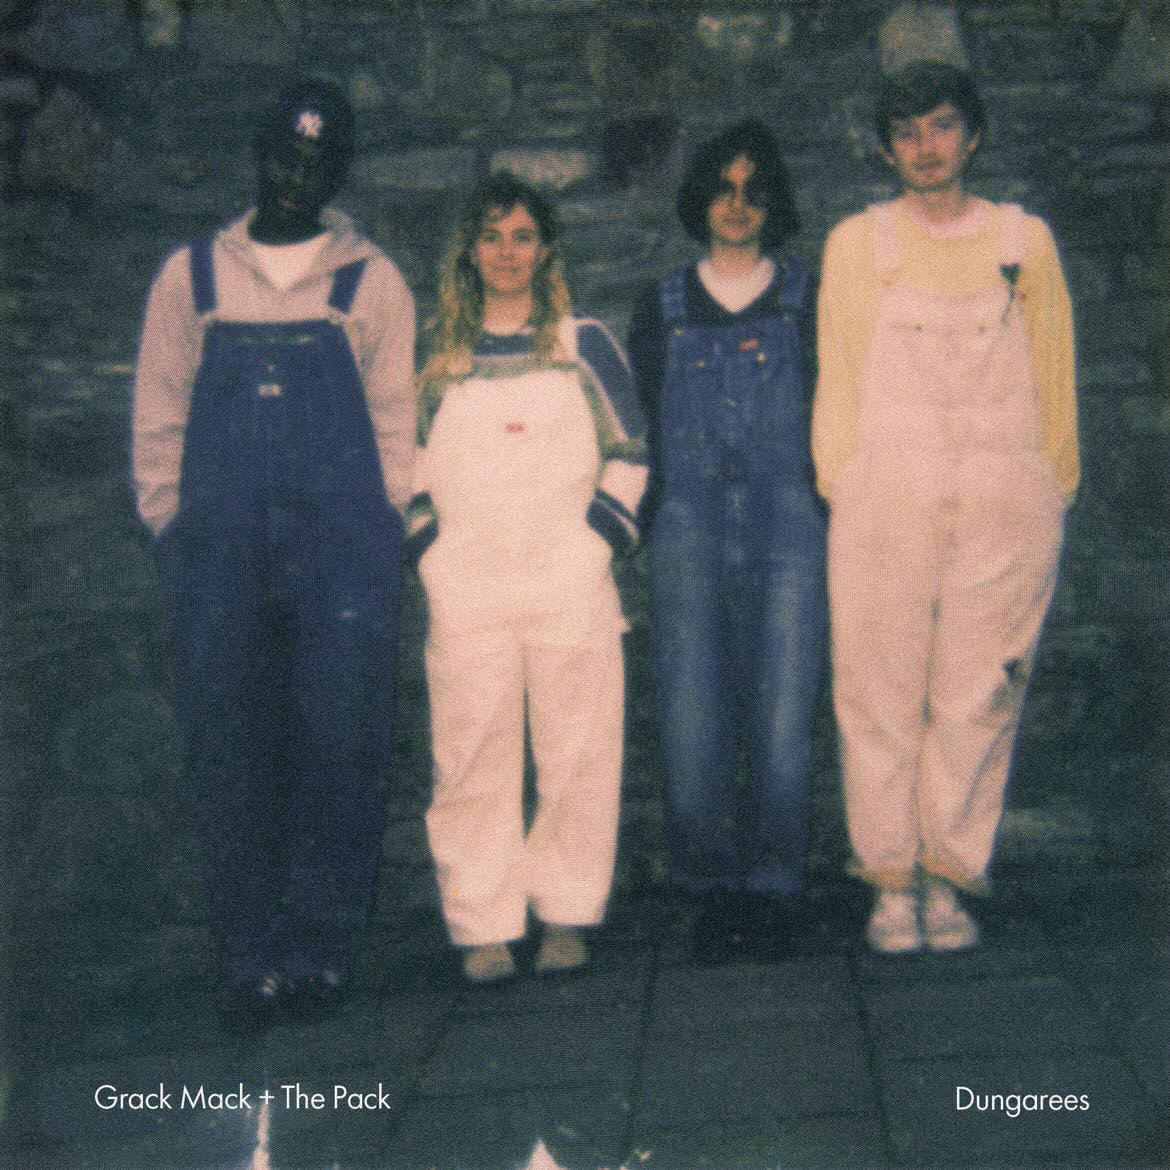 LISTEN: “Dungarees” by Grack Mack & the Pack